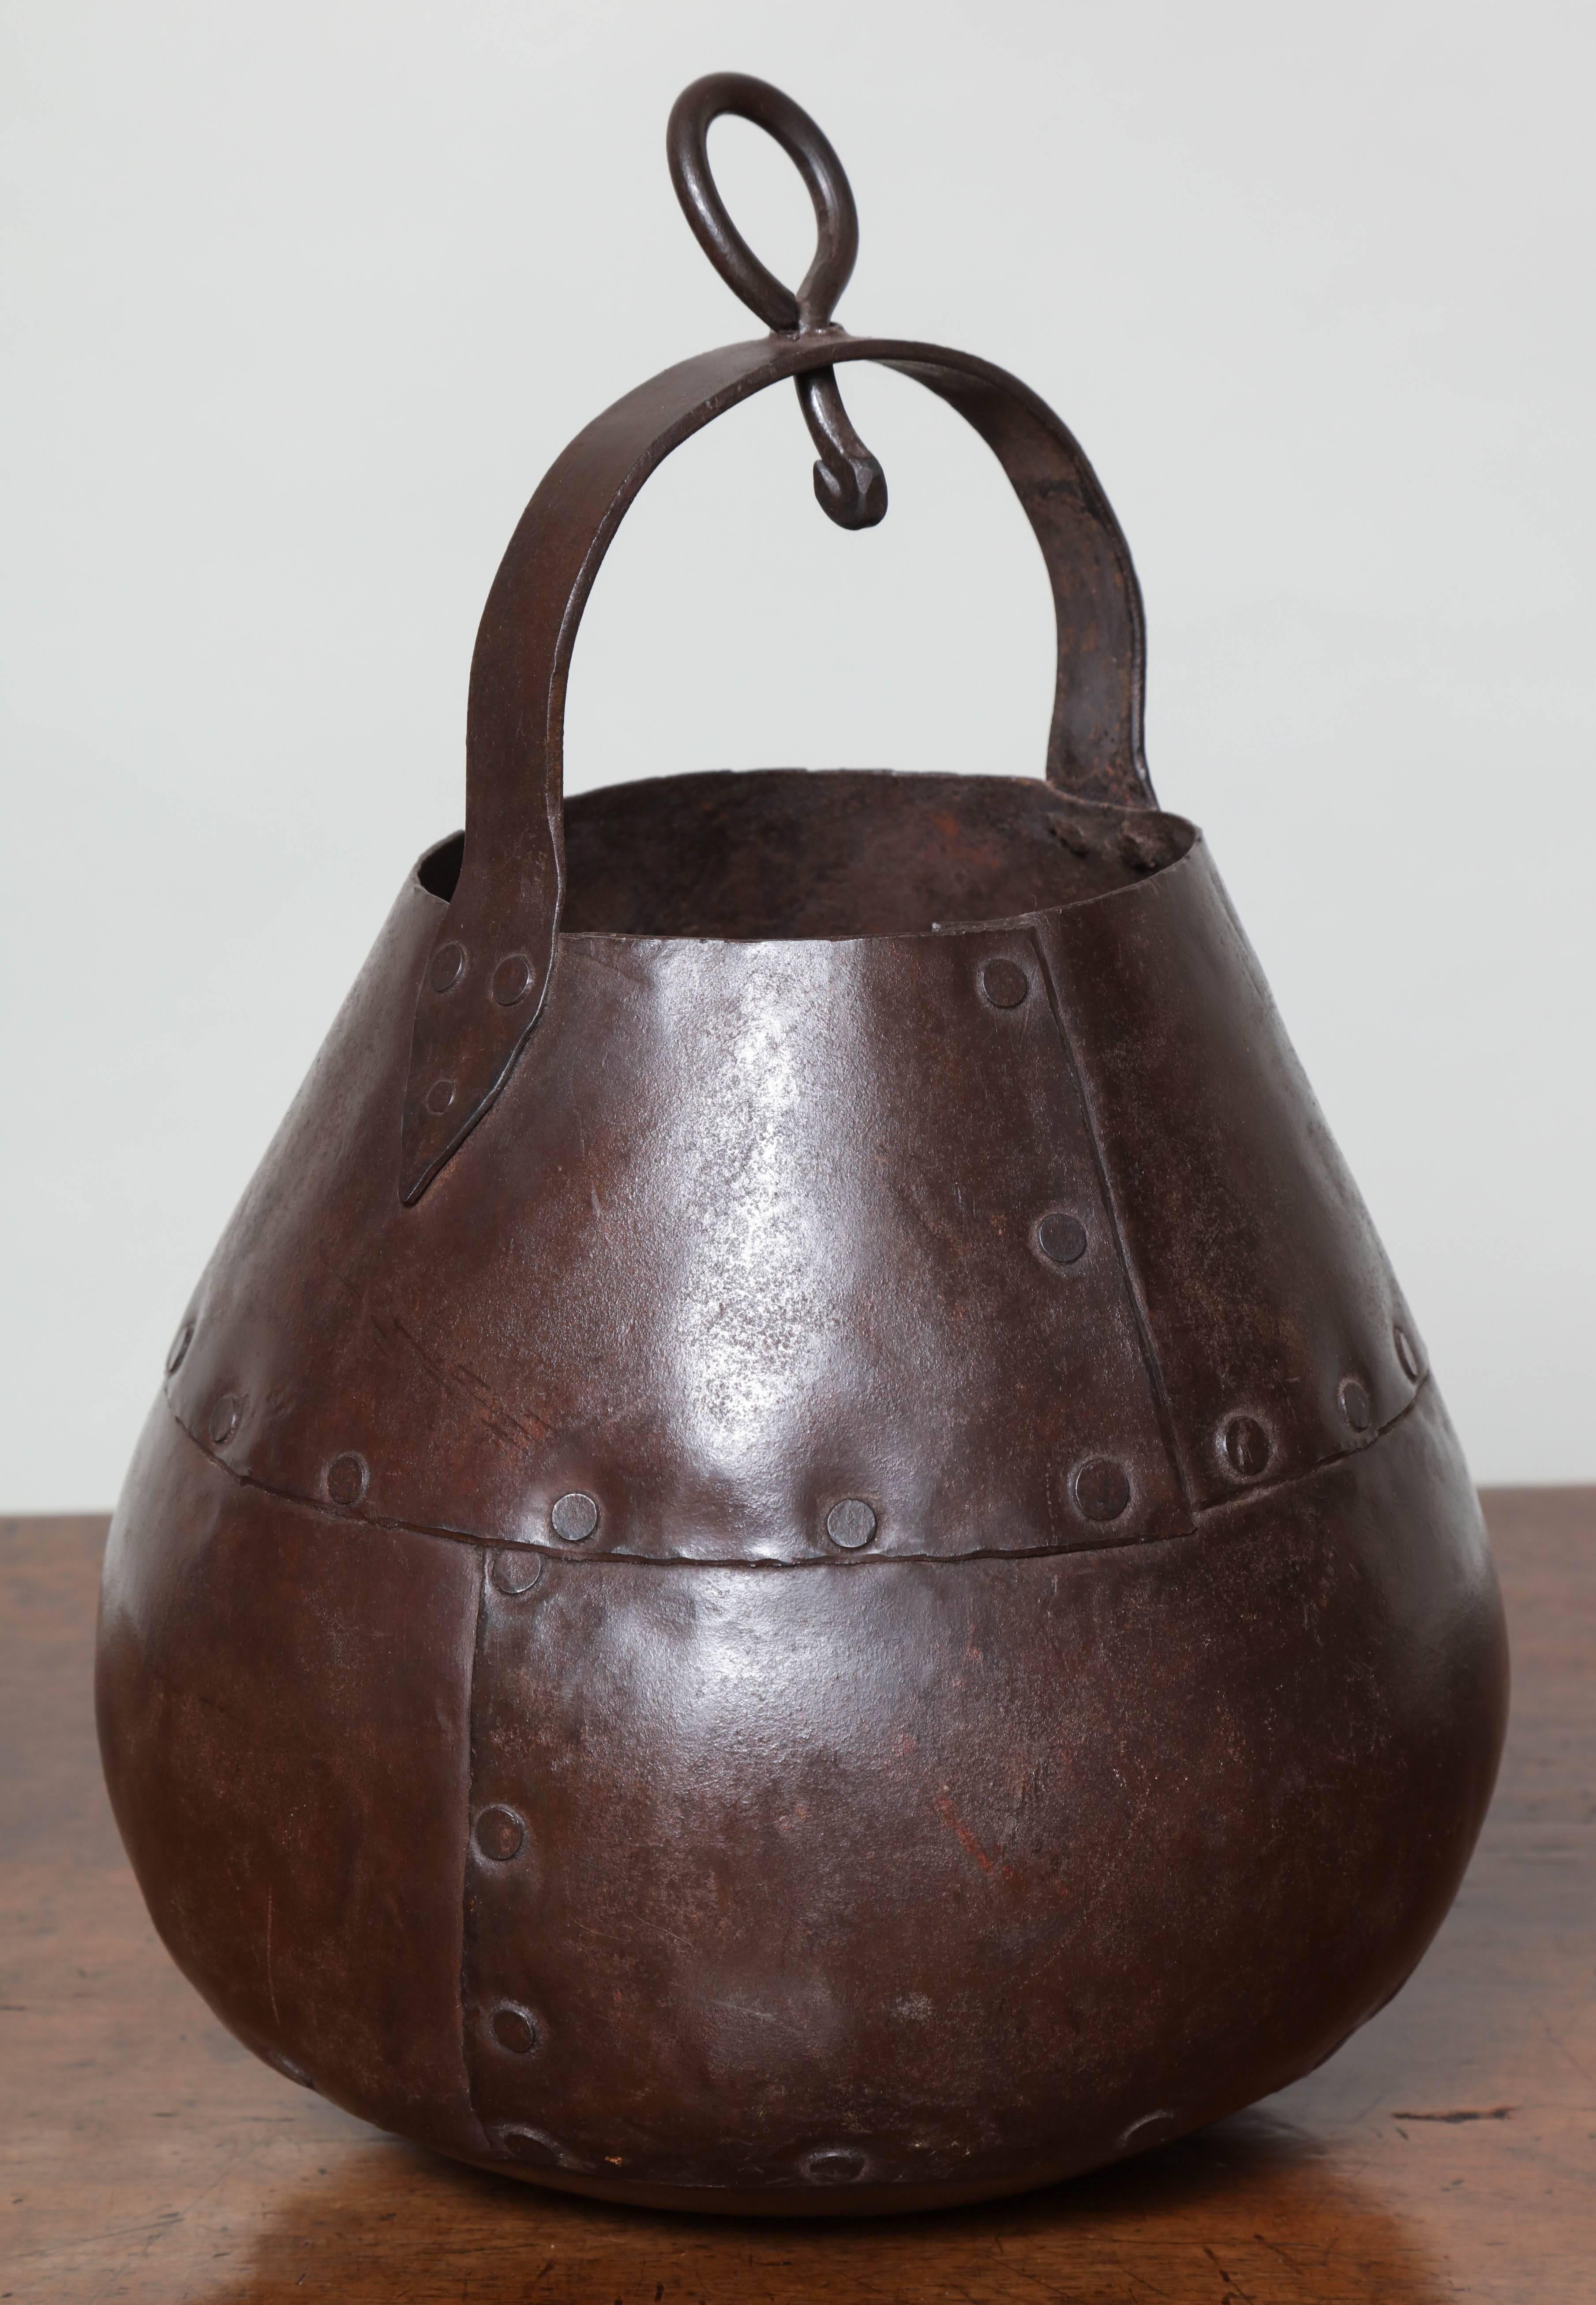 Arts and Crafts period hanging pear shaped pot with hand riveted seams, beaten surface and great color.